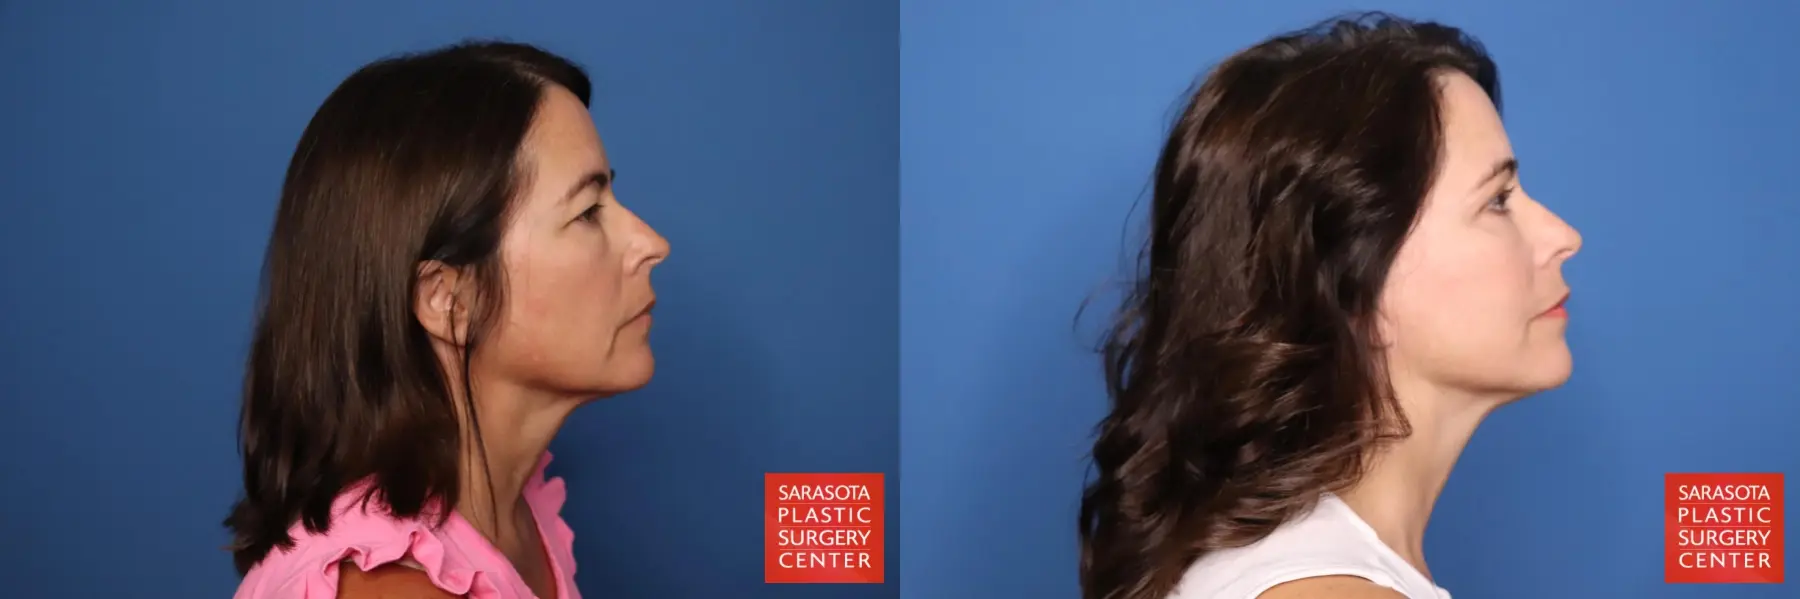 Cheek Lift: Patient 1 - Before and After 4